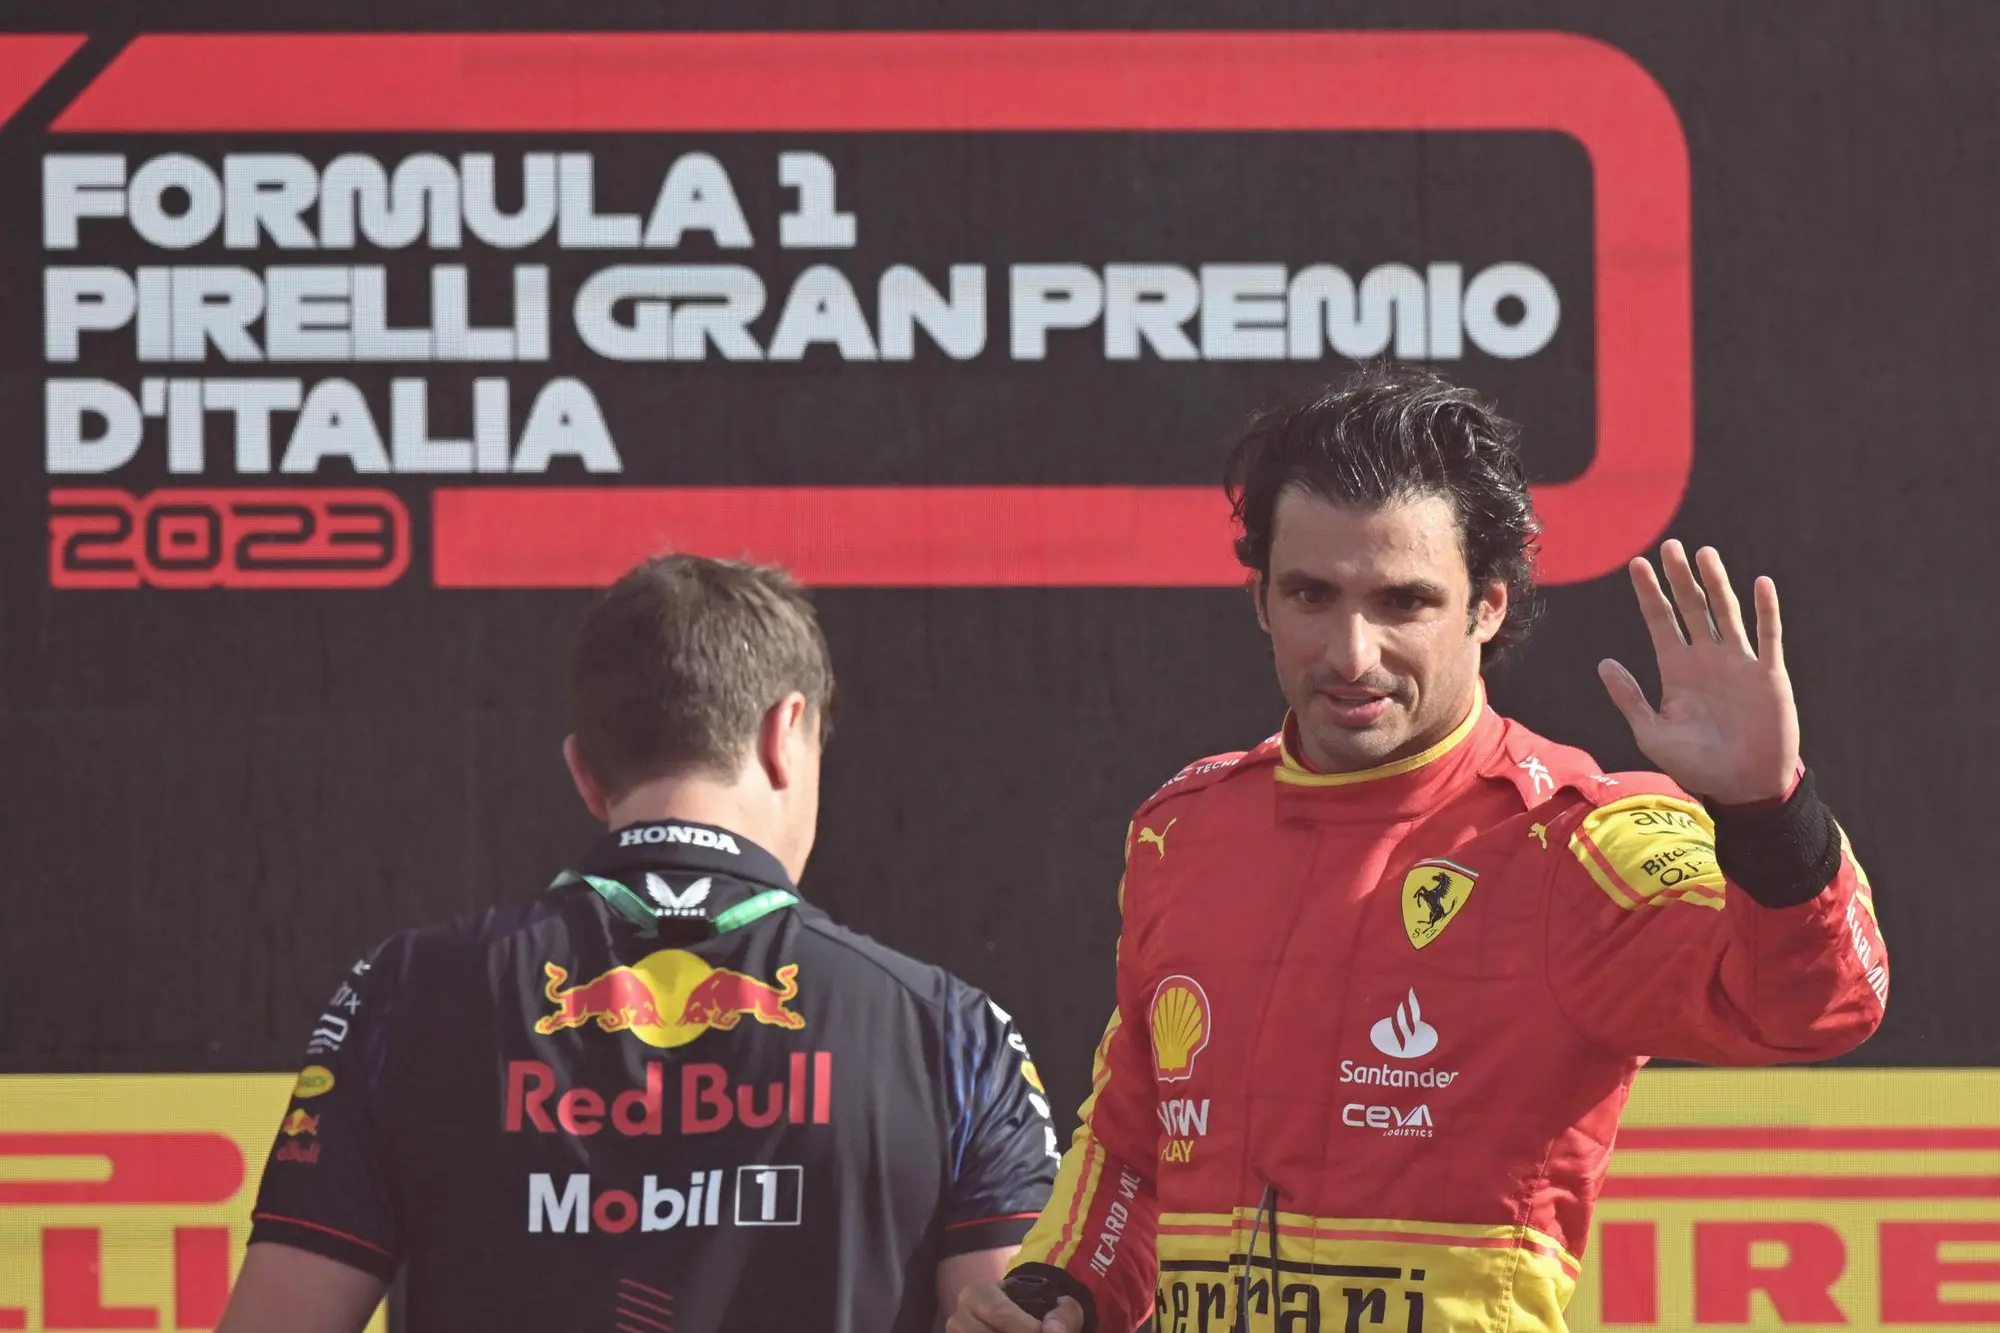 Third placed Spanish driver Carlos Sainz of Scuderia Ferrariwaves the supporters from the podium of the Italian Formula One Grand Prix at the Autodromo Nazionale in Monza, Italy, 3 september 2023. ANSA/DANIEL DAL ZENNARO